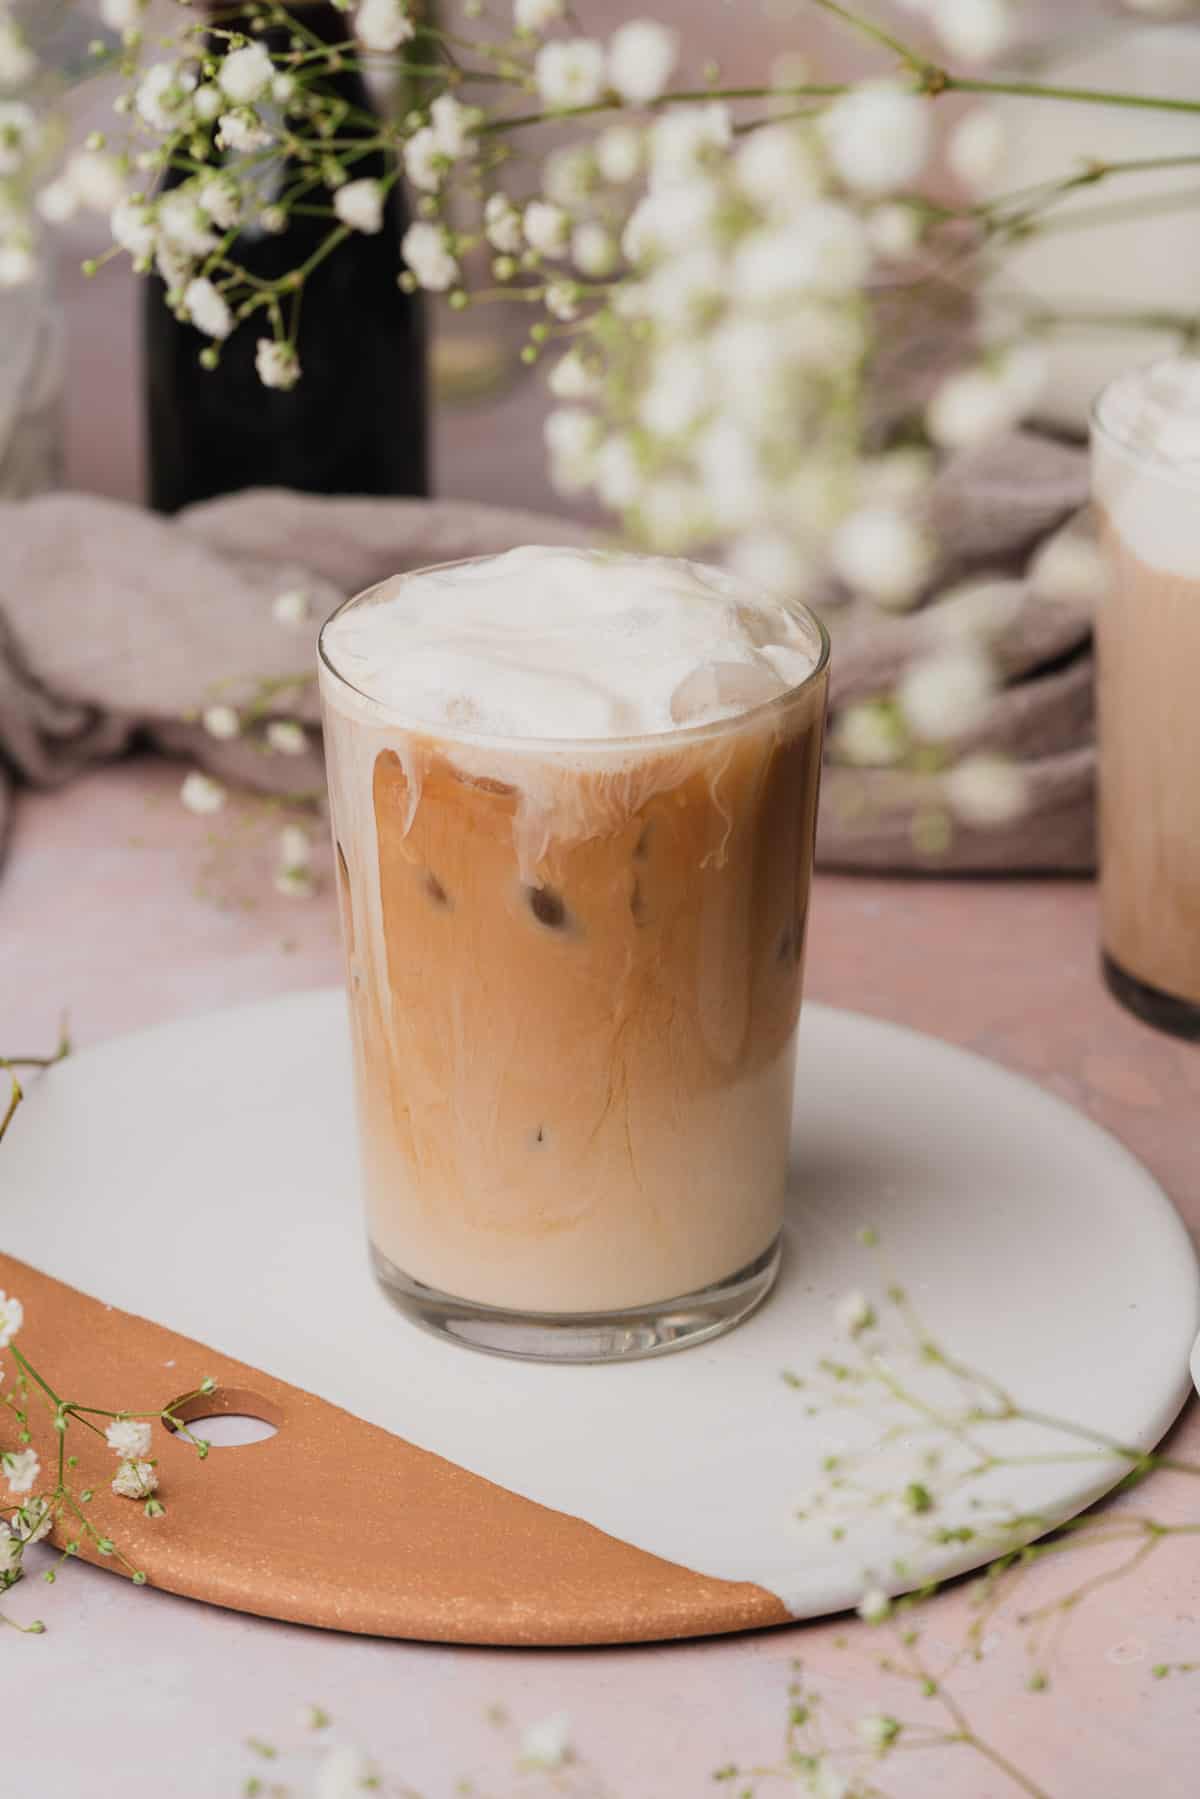 photo of an iced sweet cream cold foam coffee surrounded by small white baby's breath flowers.